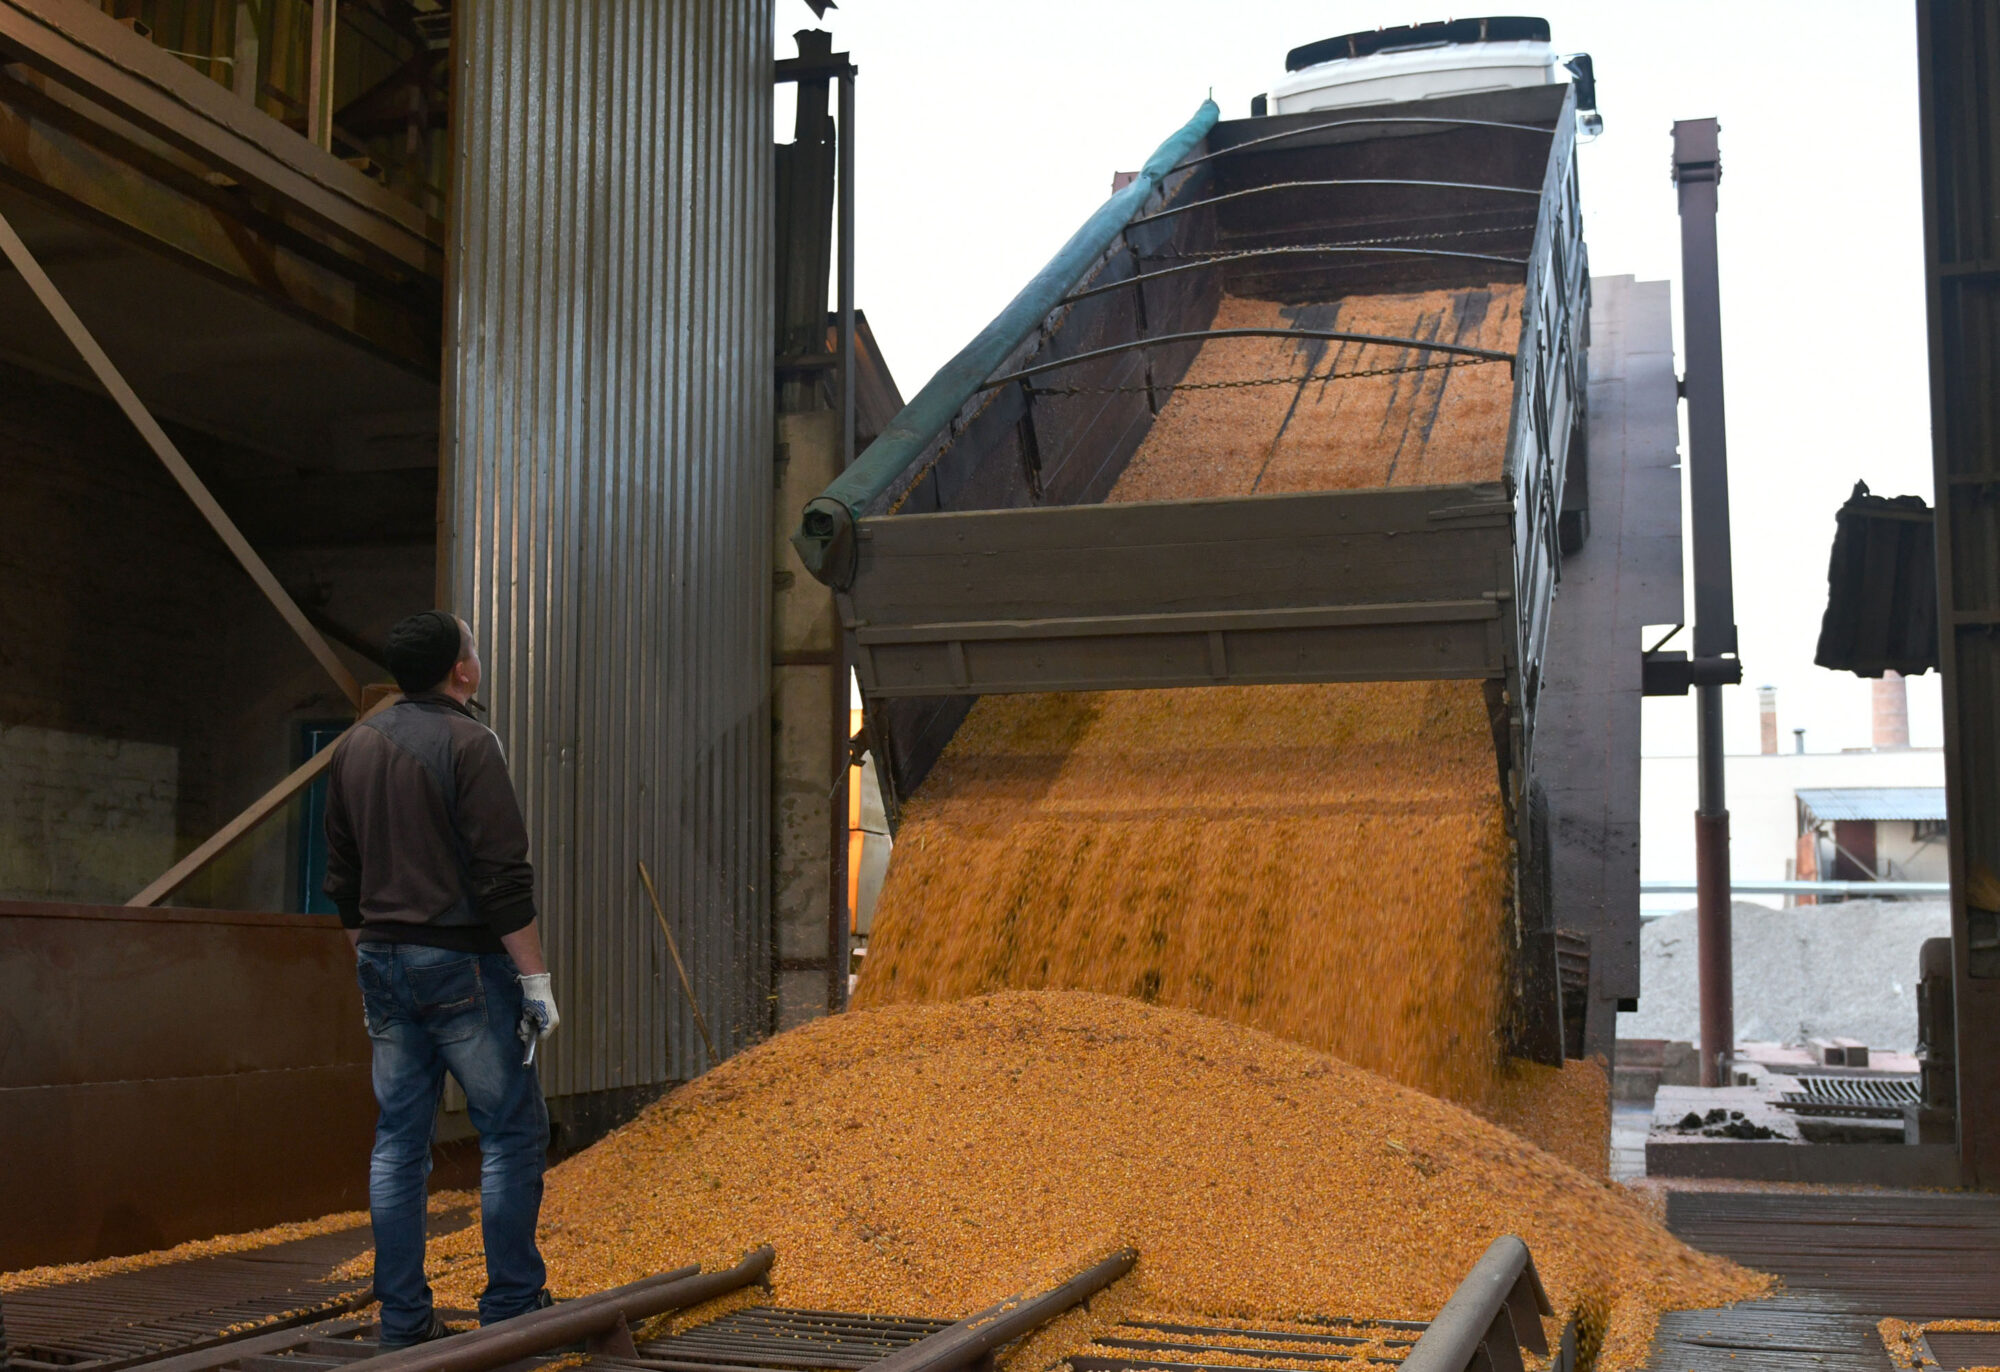 <p>A truck unloading corn grains in Skvyra, Ukraine, in 2017. The ongoing war with Russia has added another dimension of risk to a global food system already struggling with Covid-19 and climate change (Image © FAO / Genya Savilov)</p>